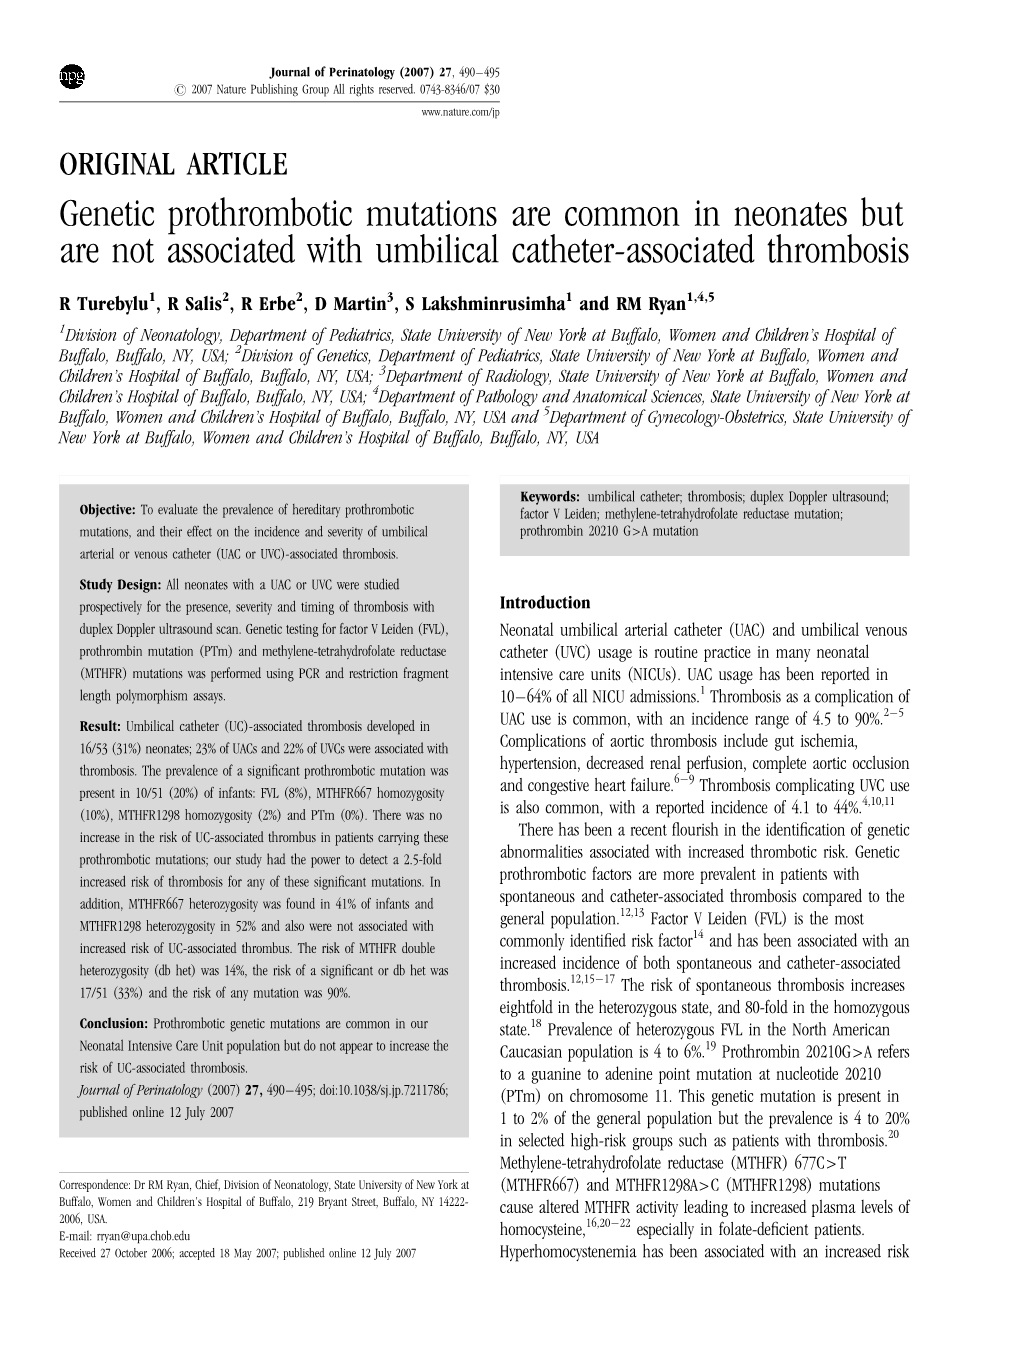 Genetic Prothrombotic Mutations Are Common in Neonates but Are Not Associated with Umbilical Catheter-Associated Thrombosis